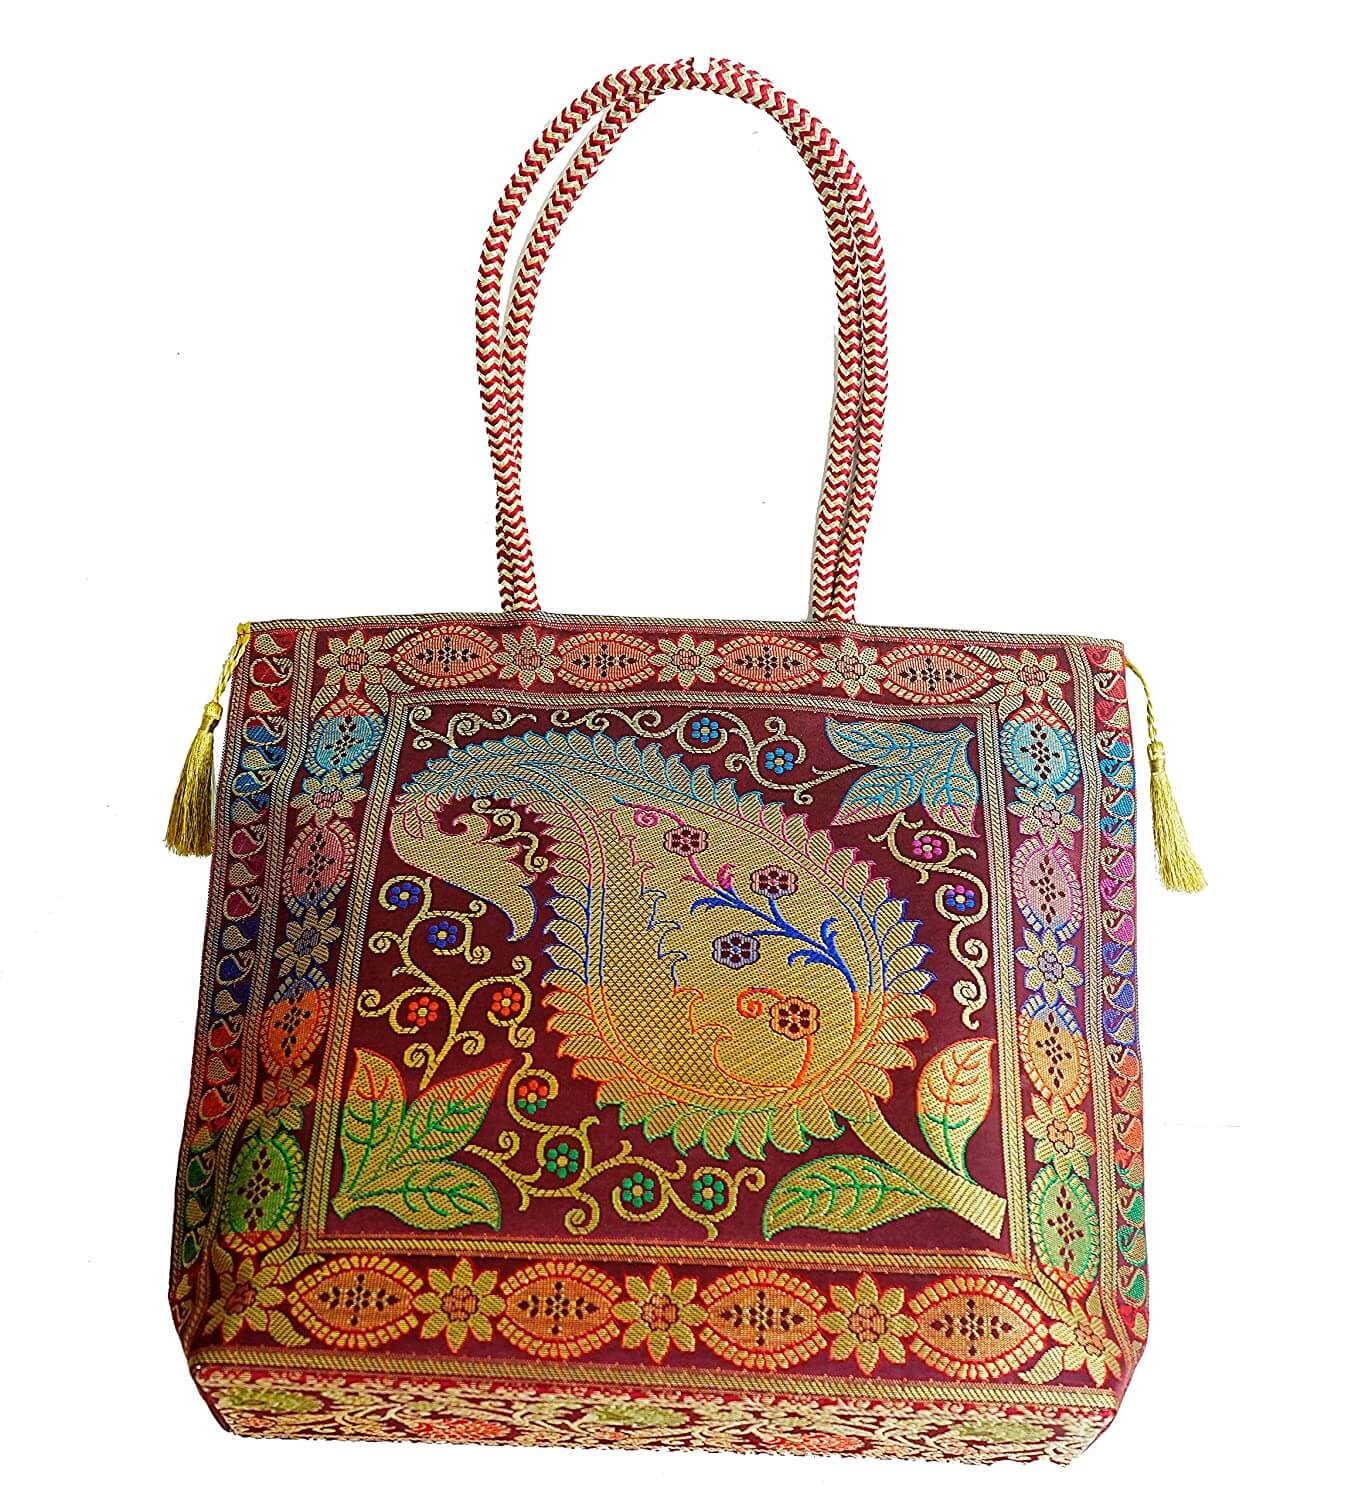 Embroidery Silk Handicraft Hand Bag, Shoulder, Tote Bag For Ladies (13 x  11.5 x 7.5 Inches, Leaves & Flower, Maroon Color)